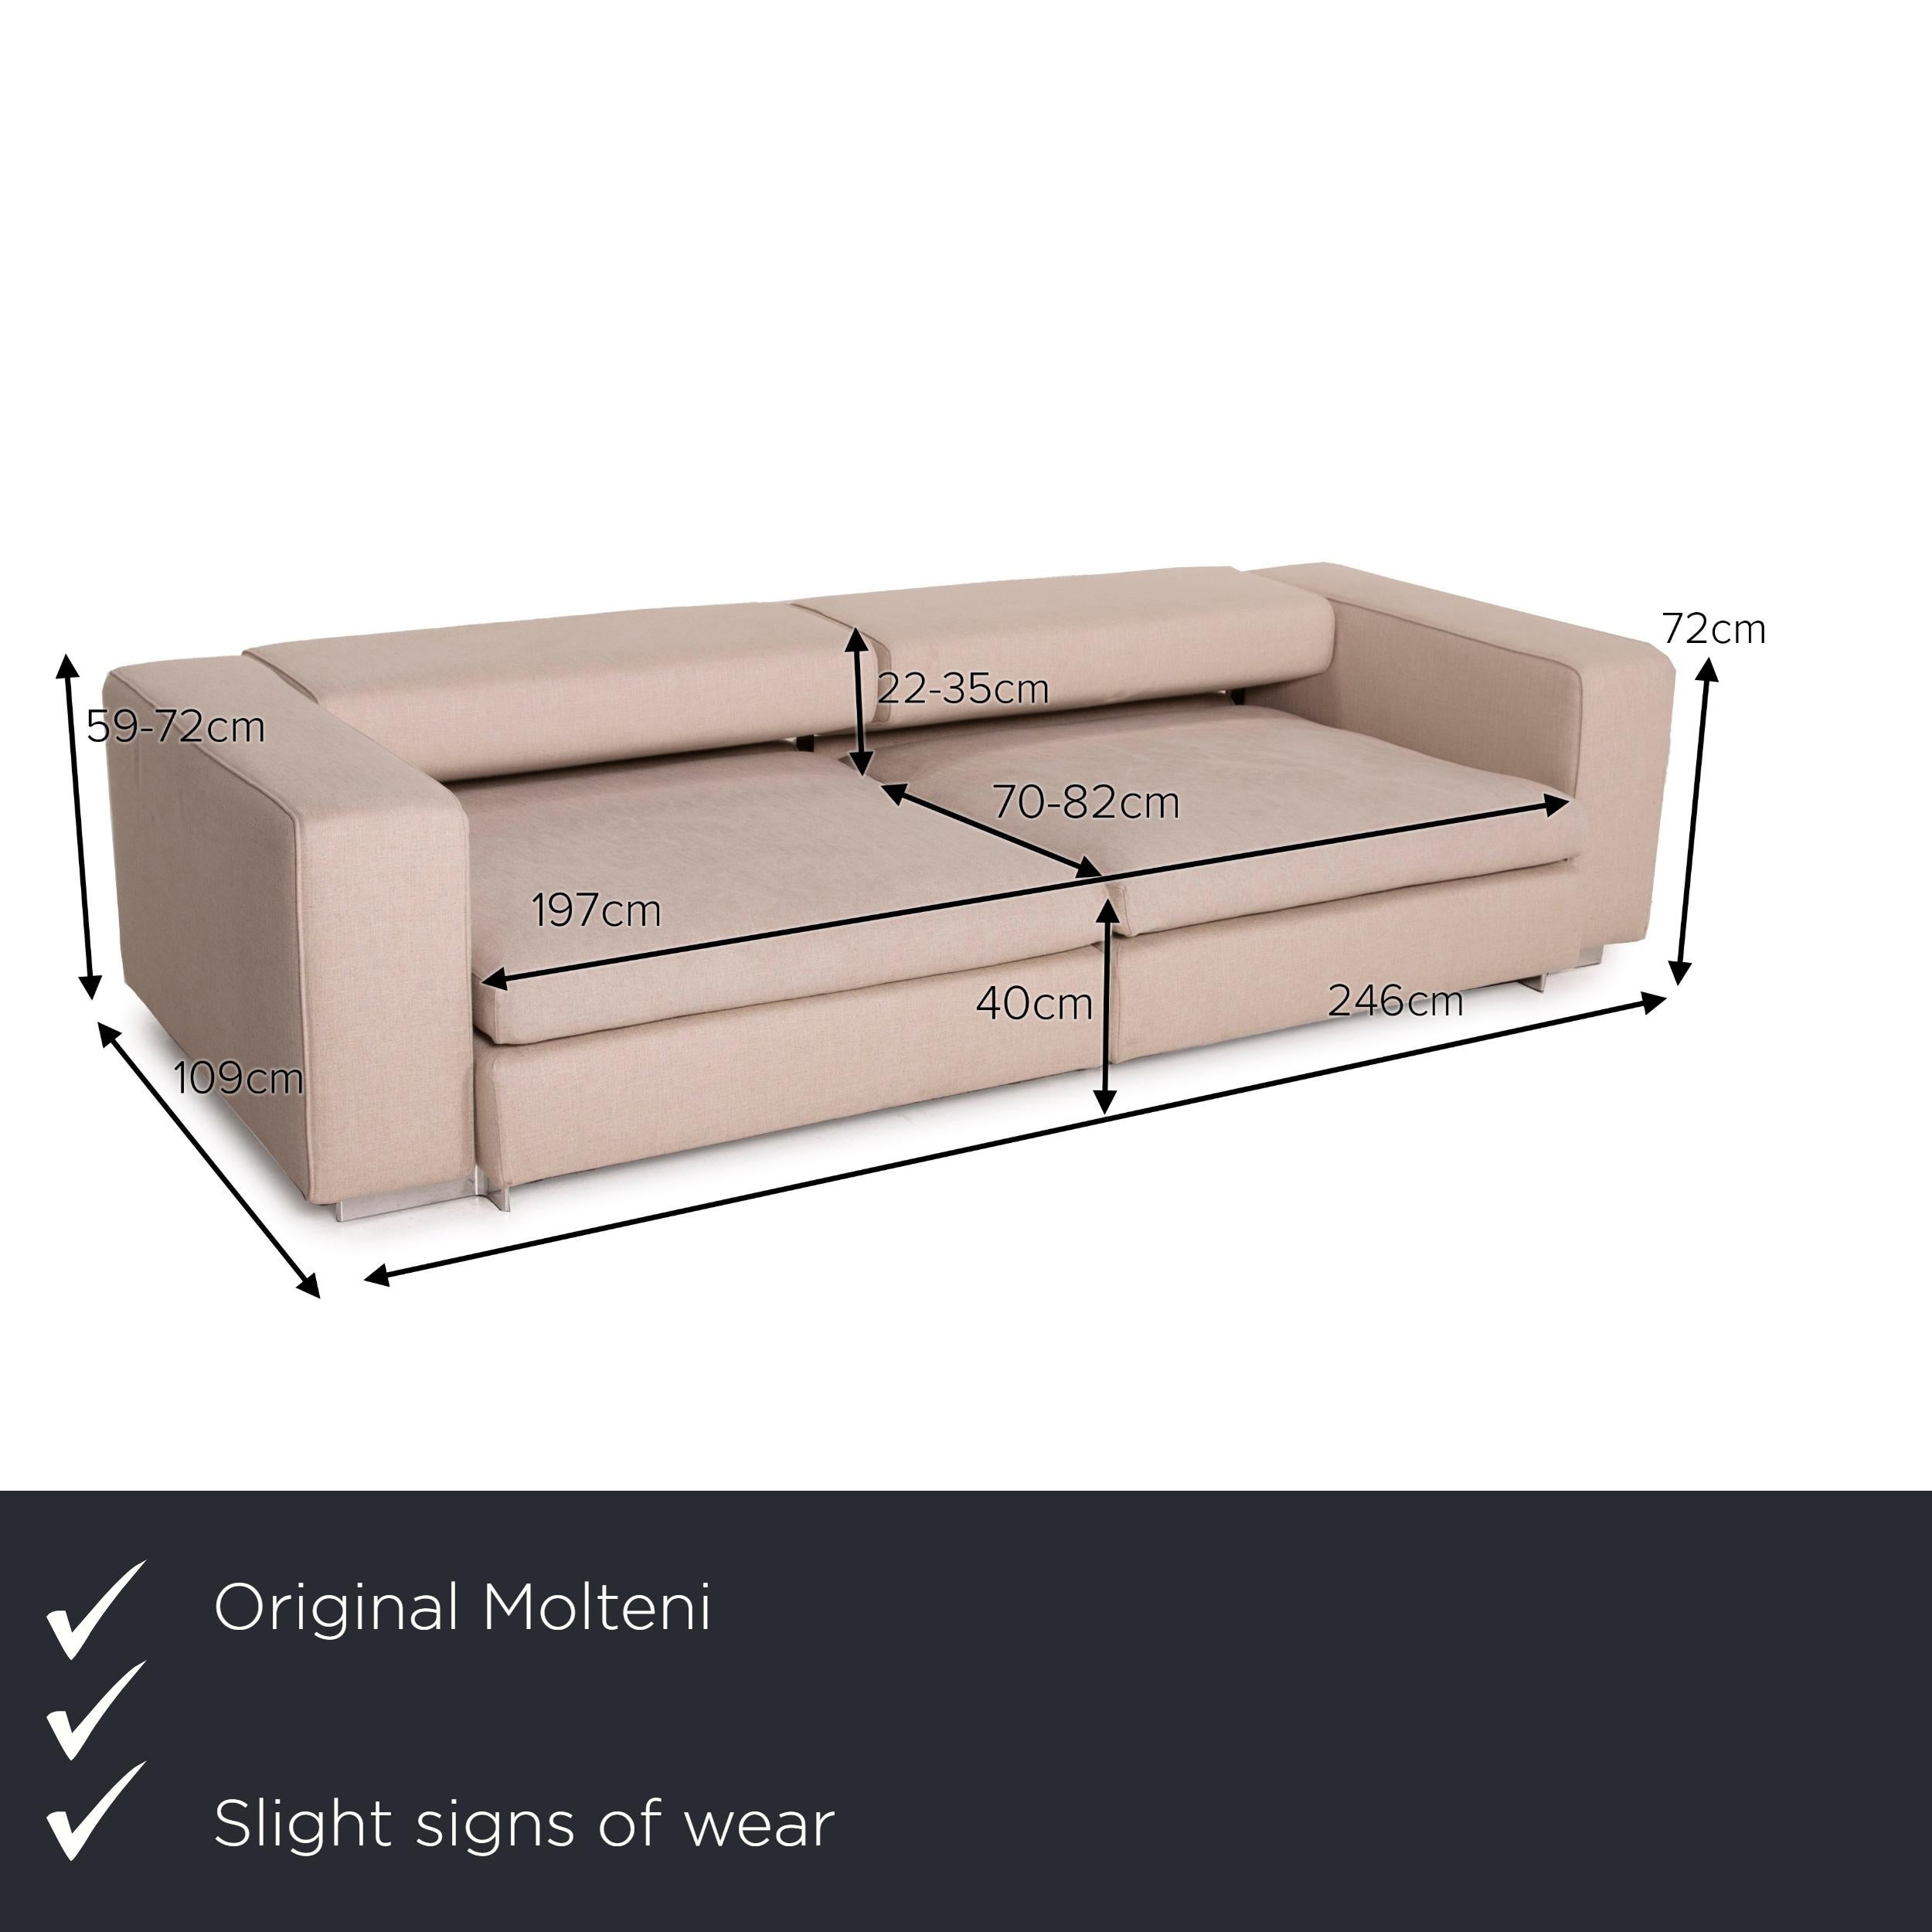 We present to you a Molteni Turner fabric sofa beige two-seater function.
  
 

 Product measurements in centimeters:
 

 depth: 109
 width: 246
 height: 59
 seat height: 40
 rest height: 59
 seat depth: 70
 seat width: 197
 back